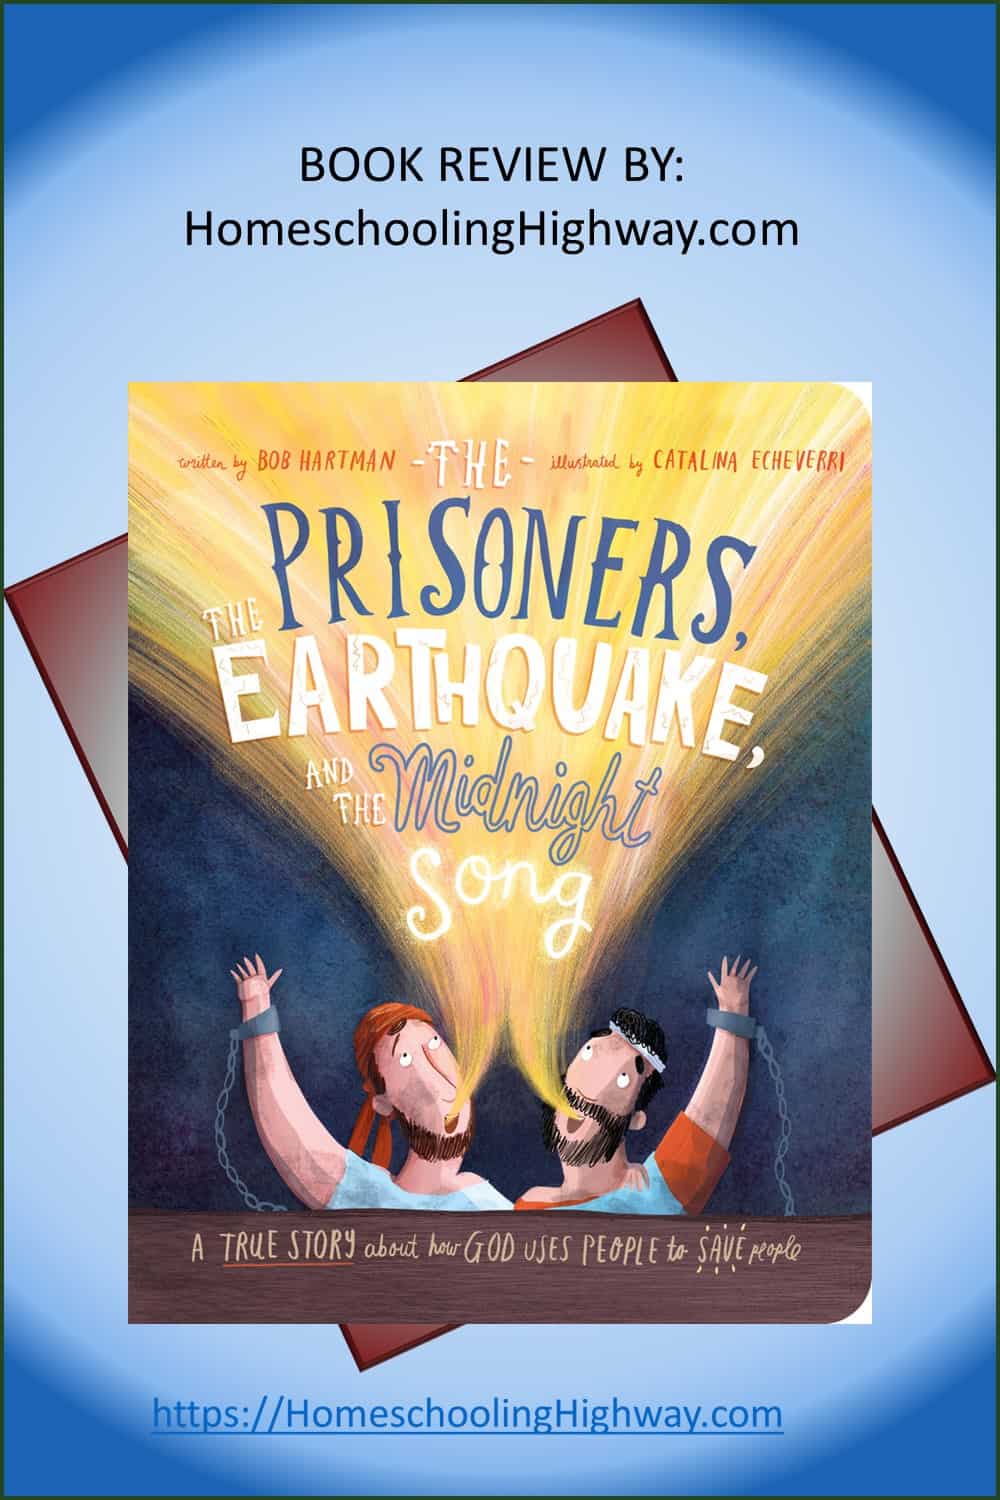 Book Review by HomeschoolingHighway.com. The Prisoners, Earthquake, and the Midnight Song